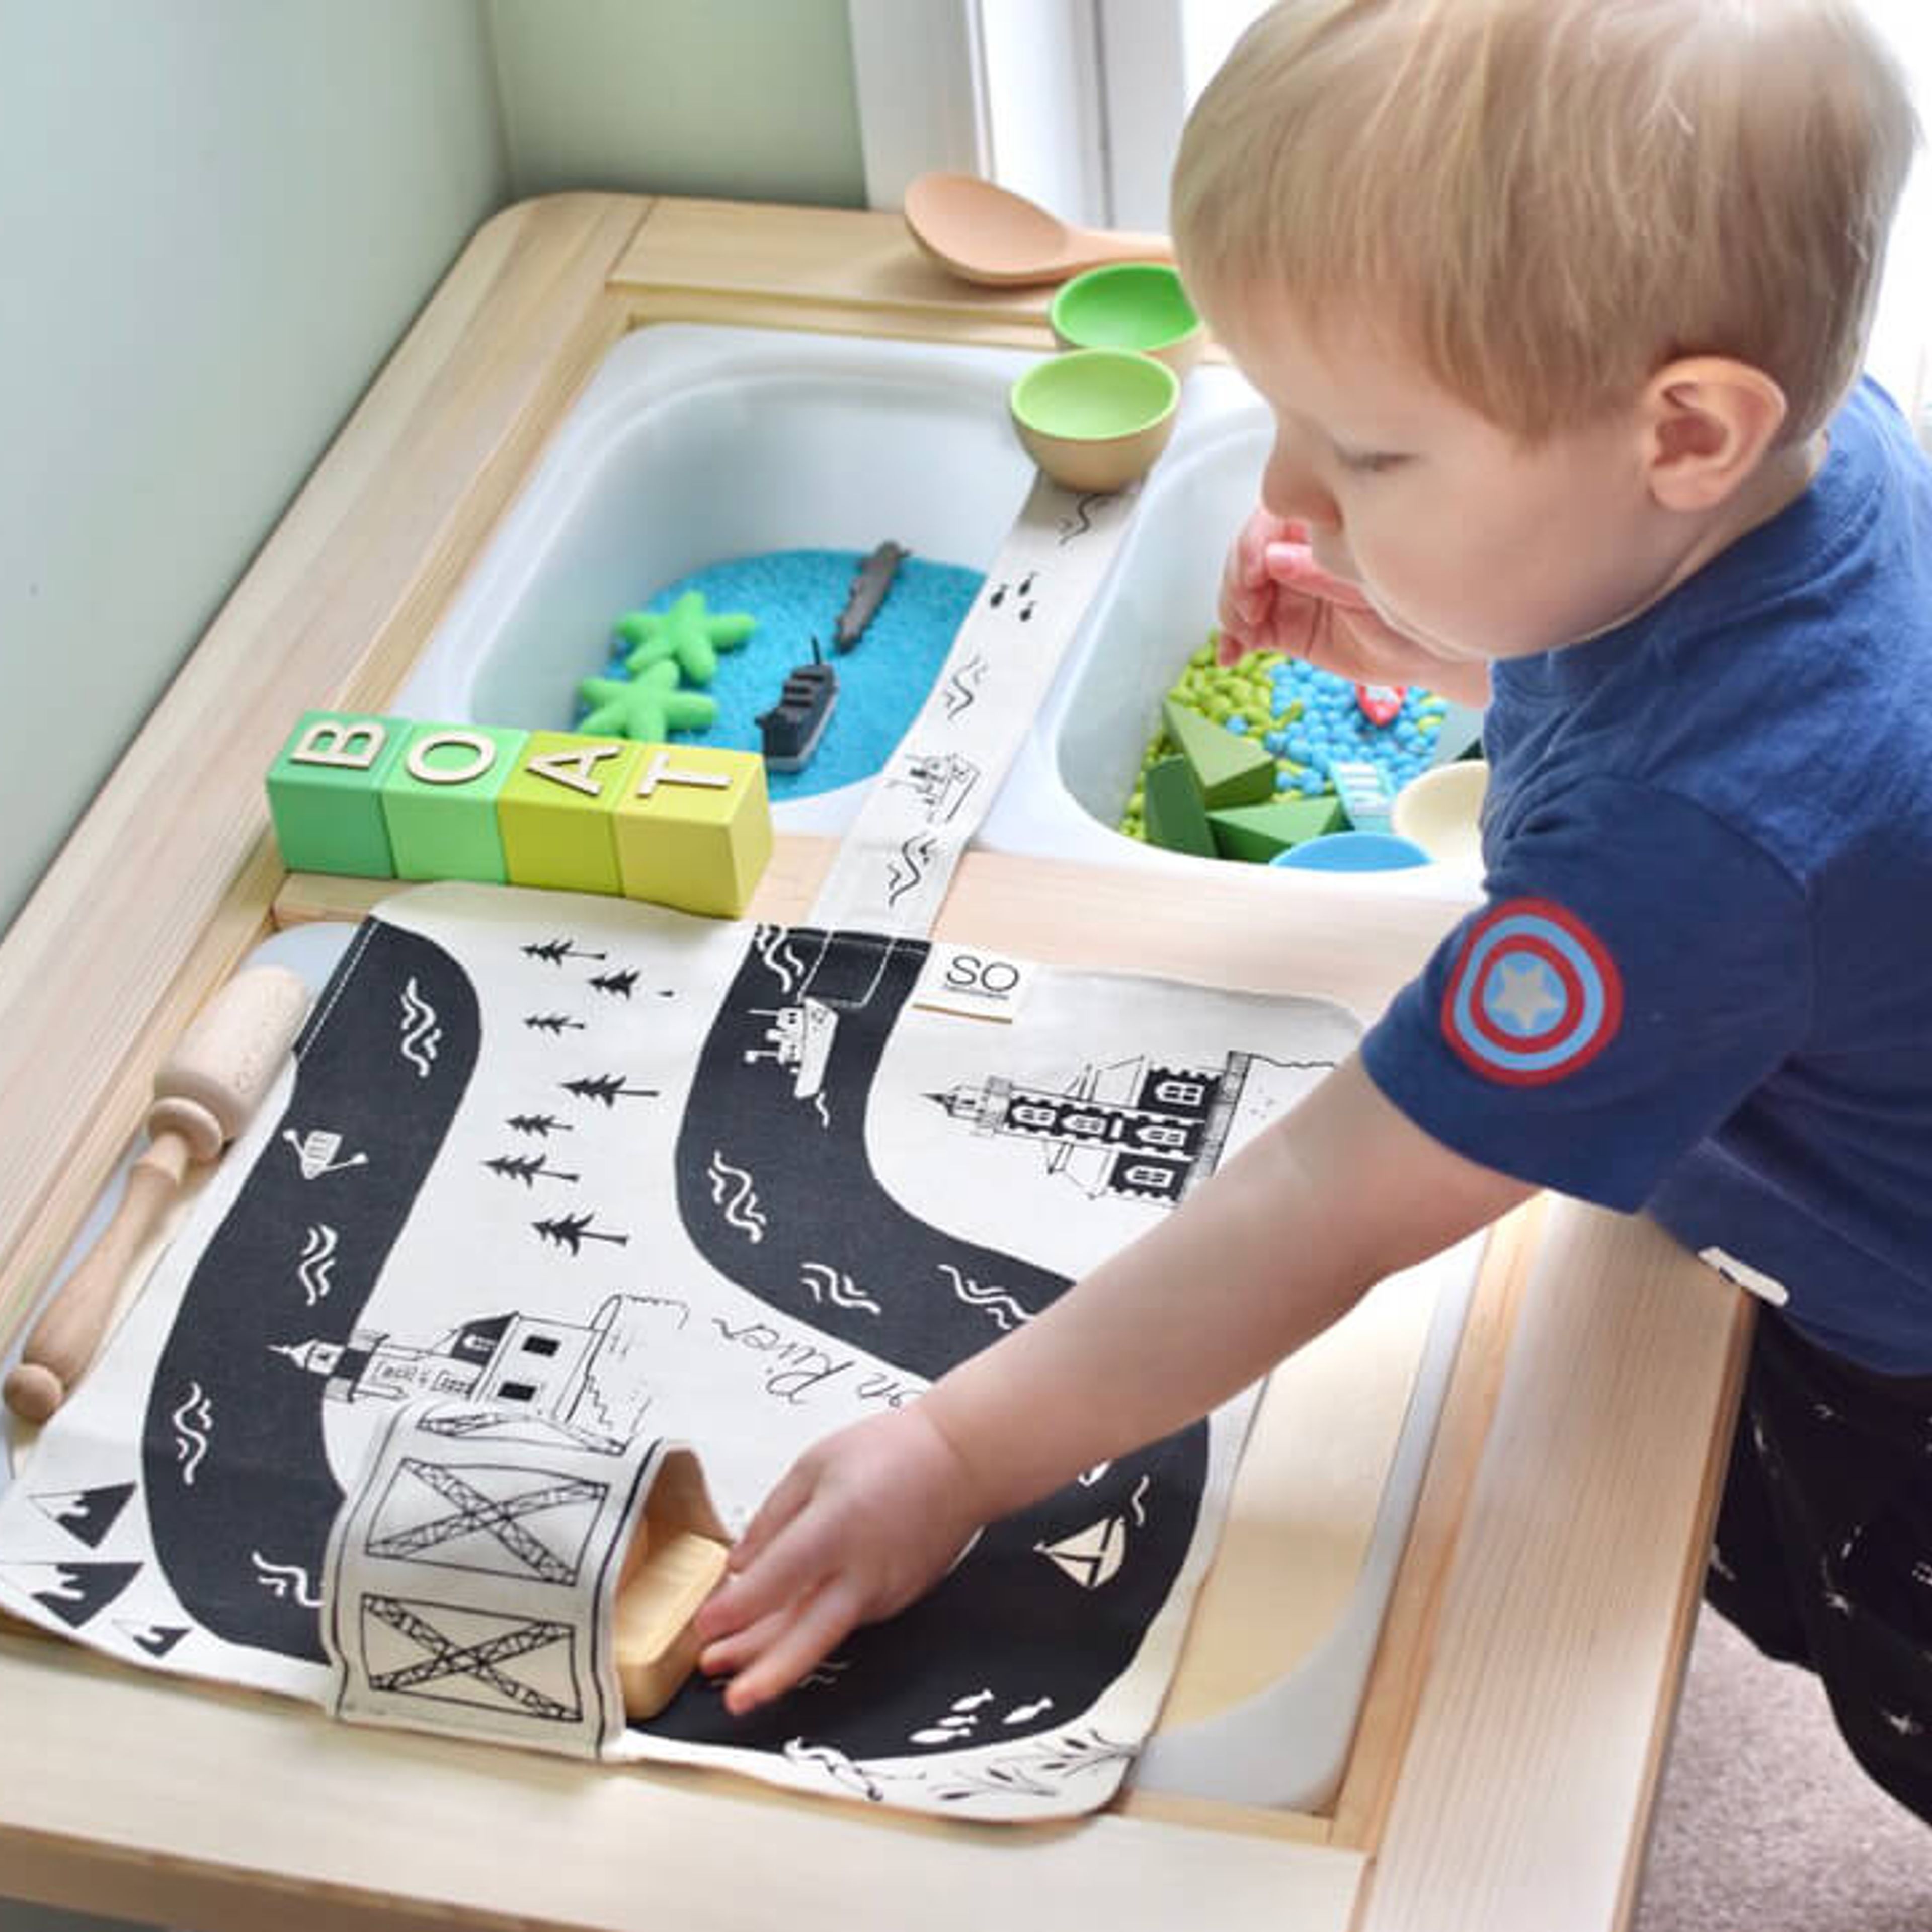 Hudson River Play Mat: "This is one of my very favorites!"